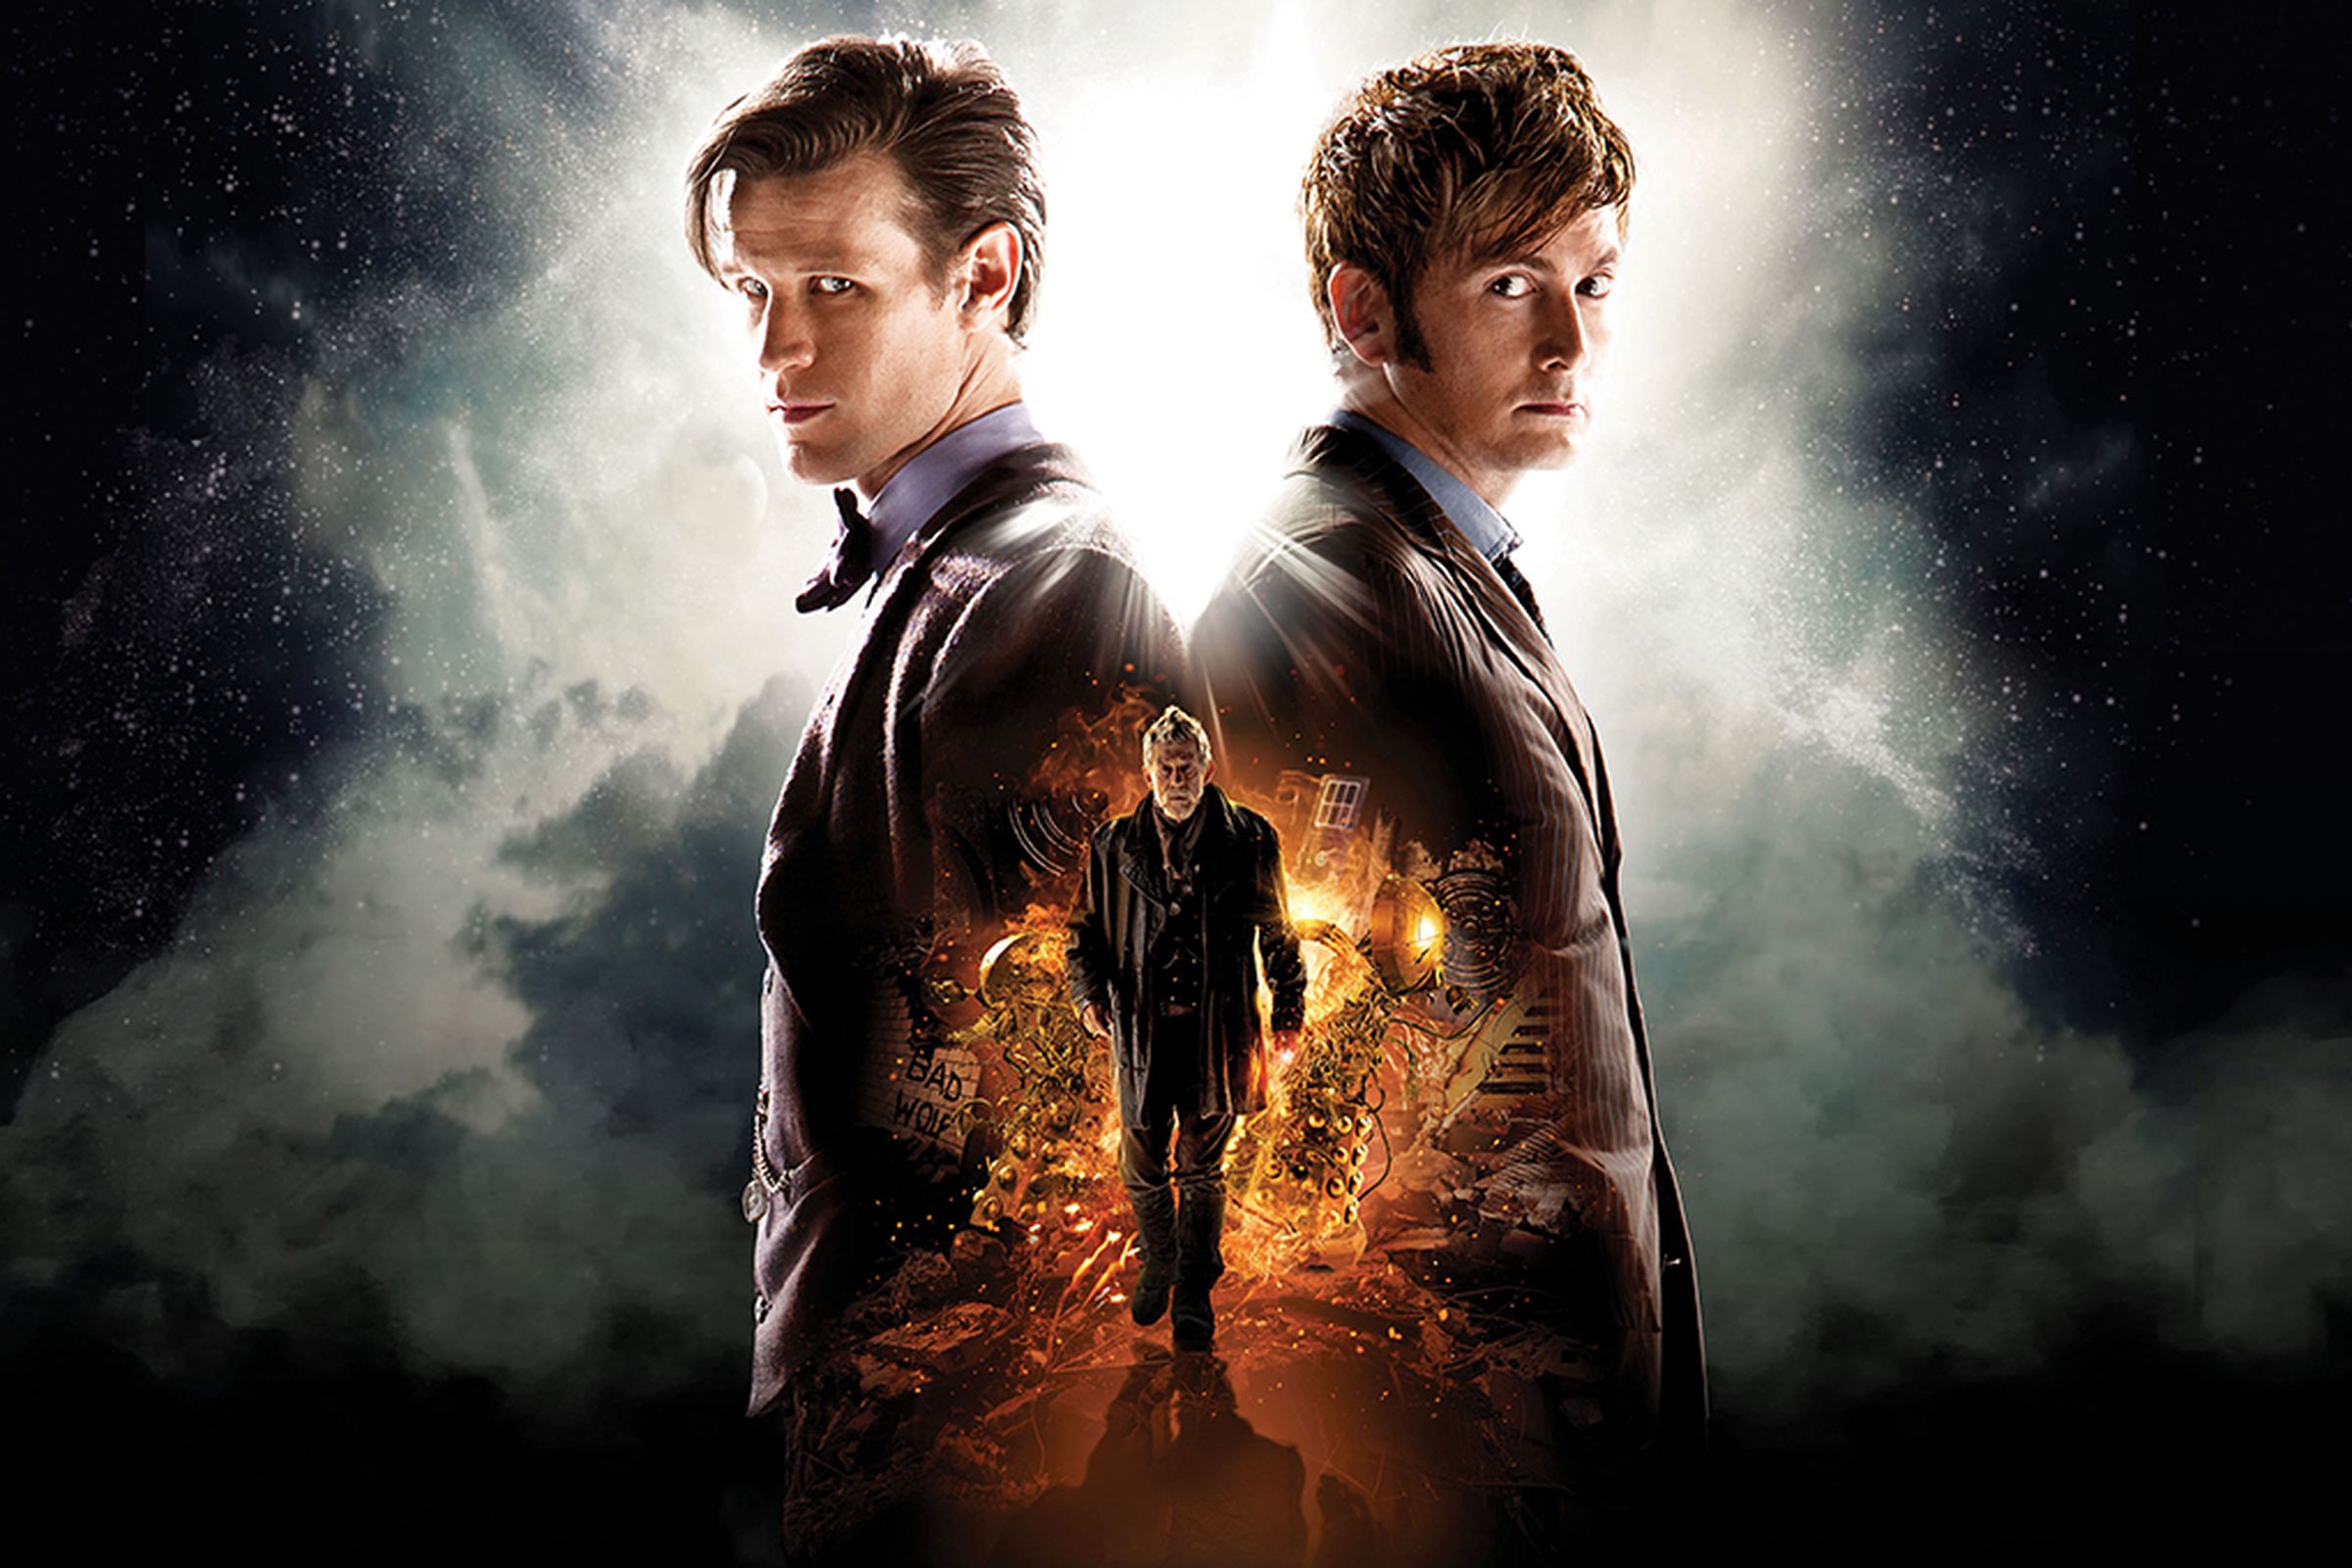 Doctor Who: Day of the Doctor 50th anniversary special